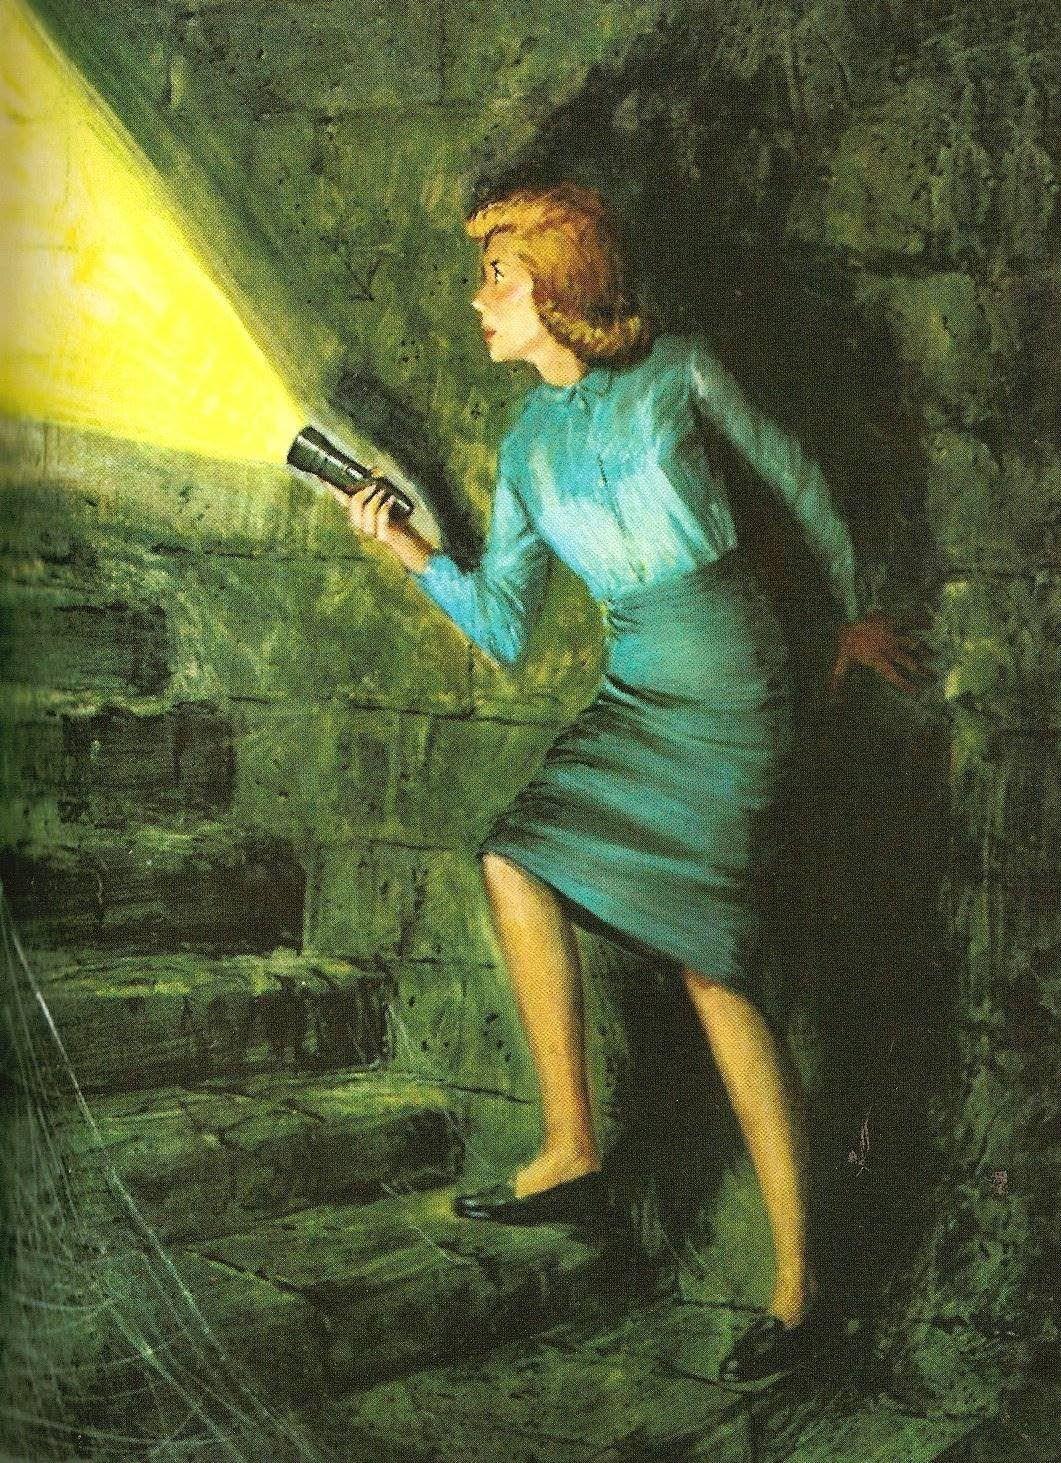 Nancy Drew. Loved these books. Probably the one with the hidden